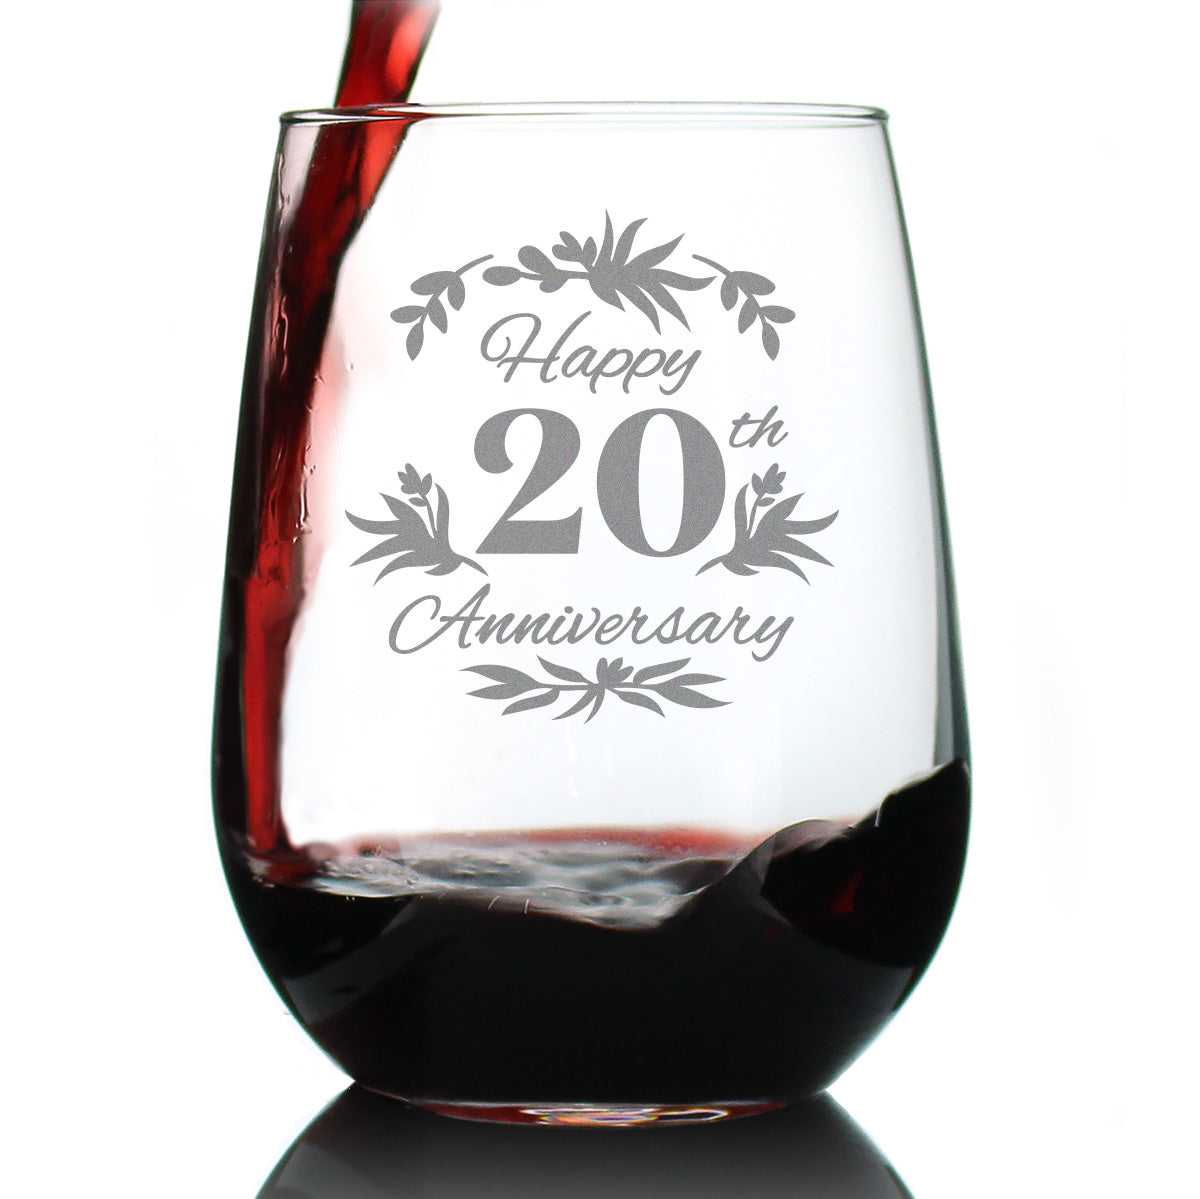 Happy 20th Anniversary - Stemless Wine Glass Gifts for Women & Men - 20 Year Anniversary Party Decor - Large Glasses